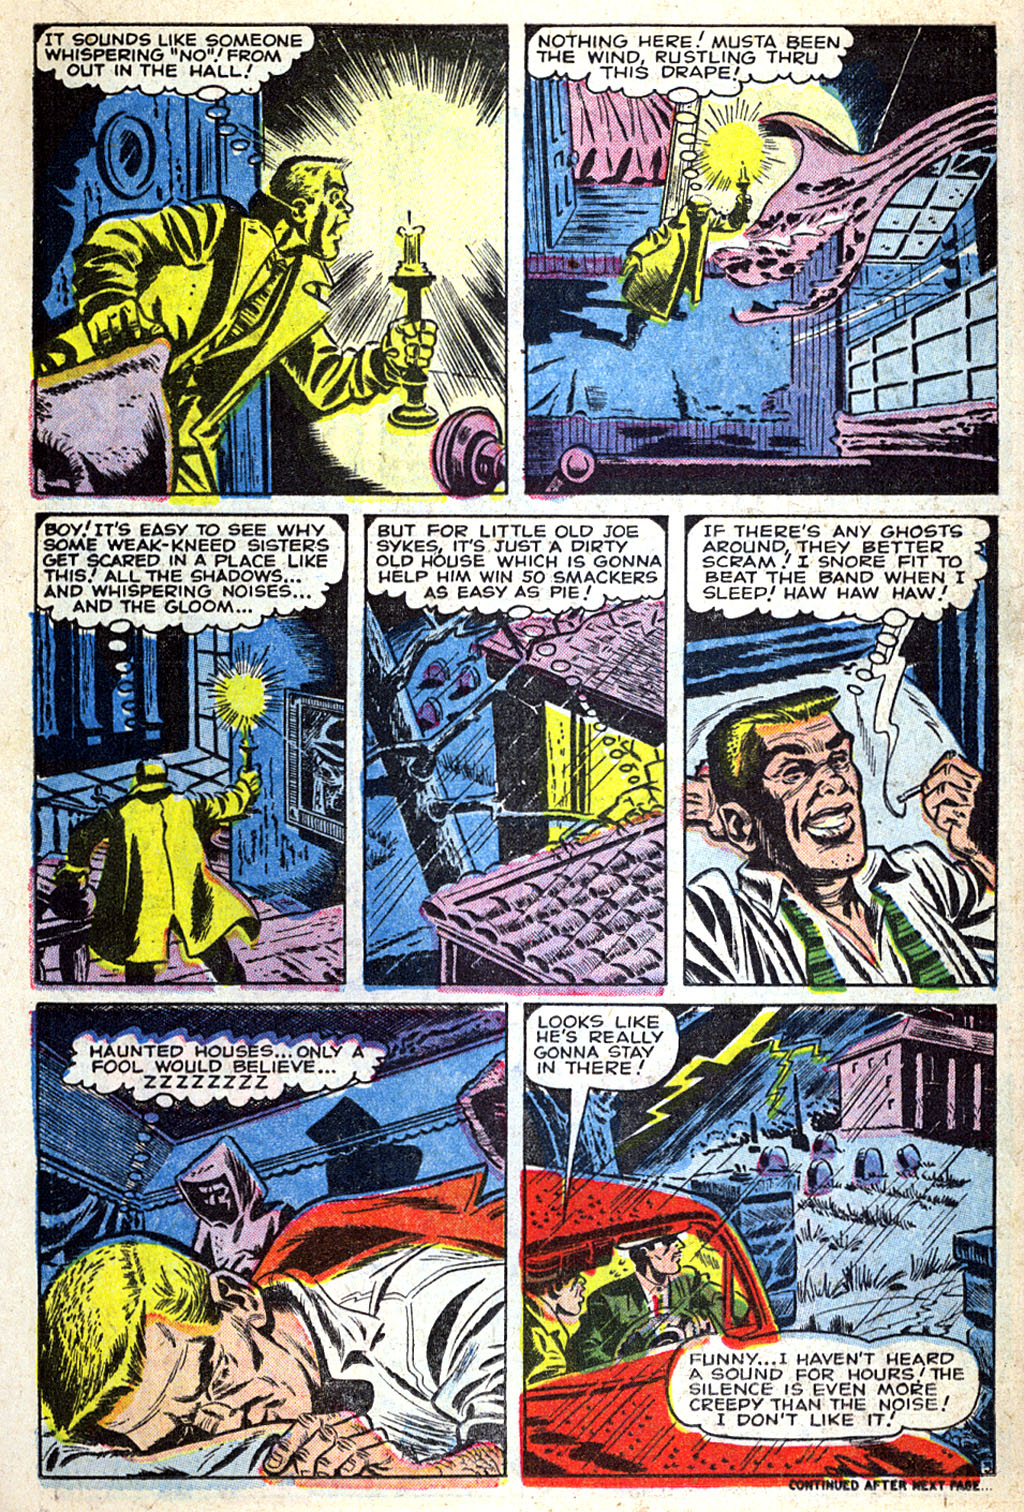 Journey Into Mystery (1952) 22 Page 11